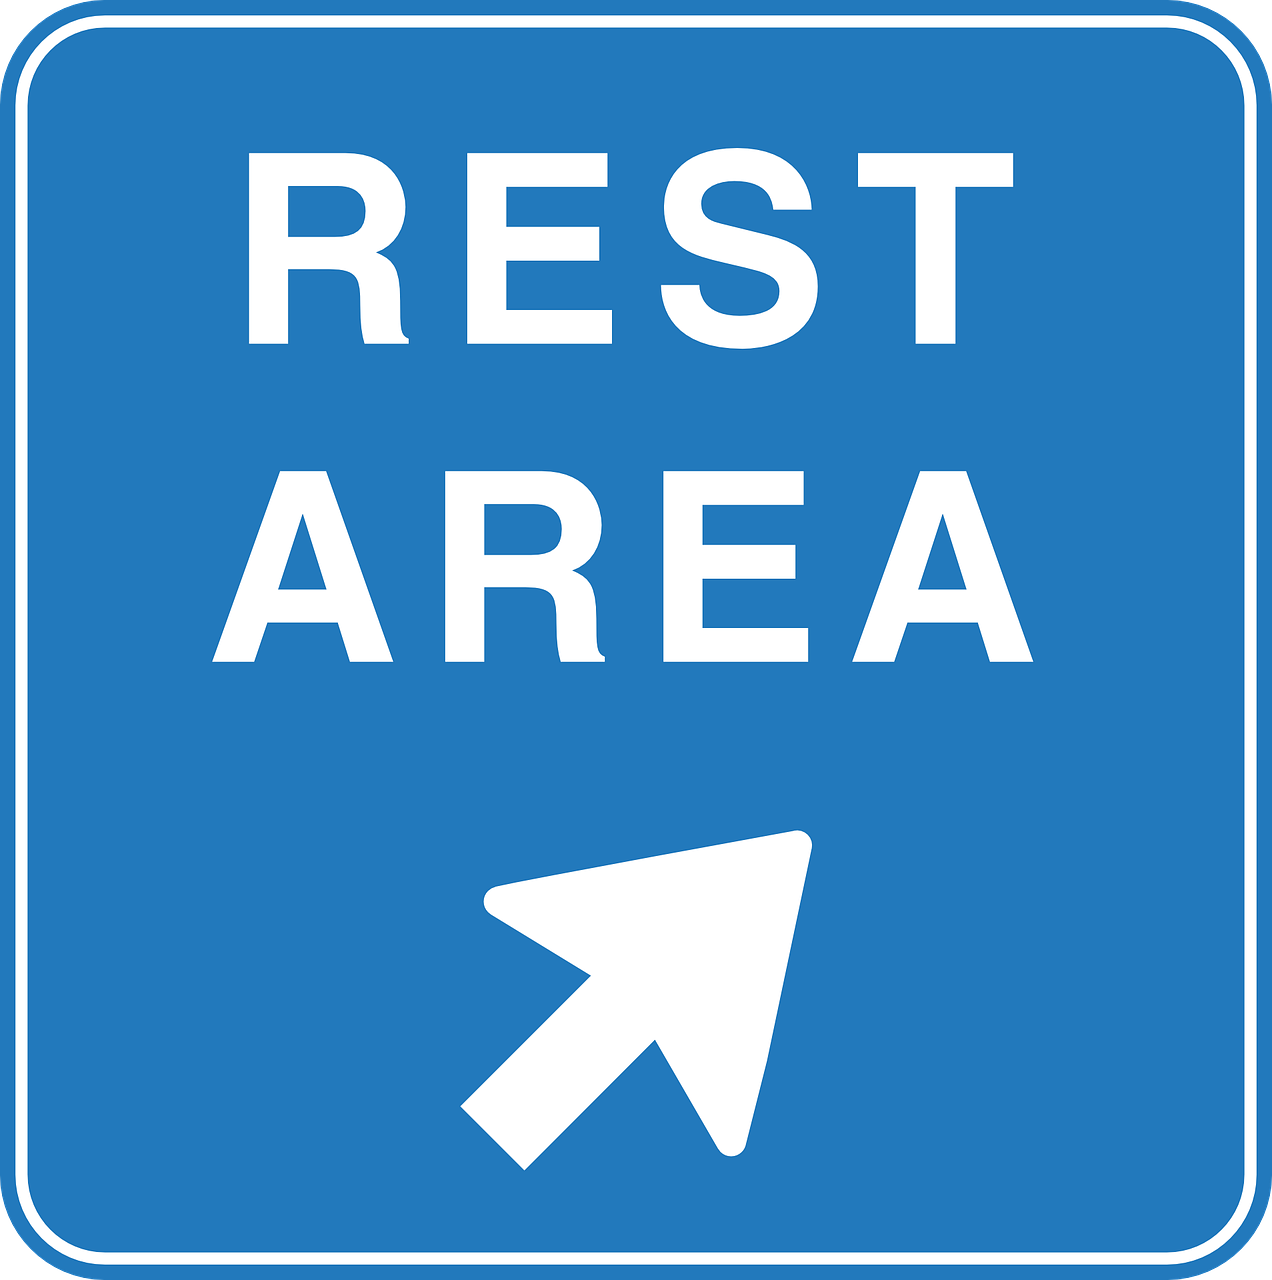 A sign saying 'REST AREA', with an arrow pointing up and to the right.